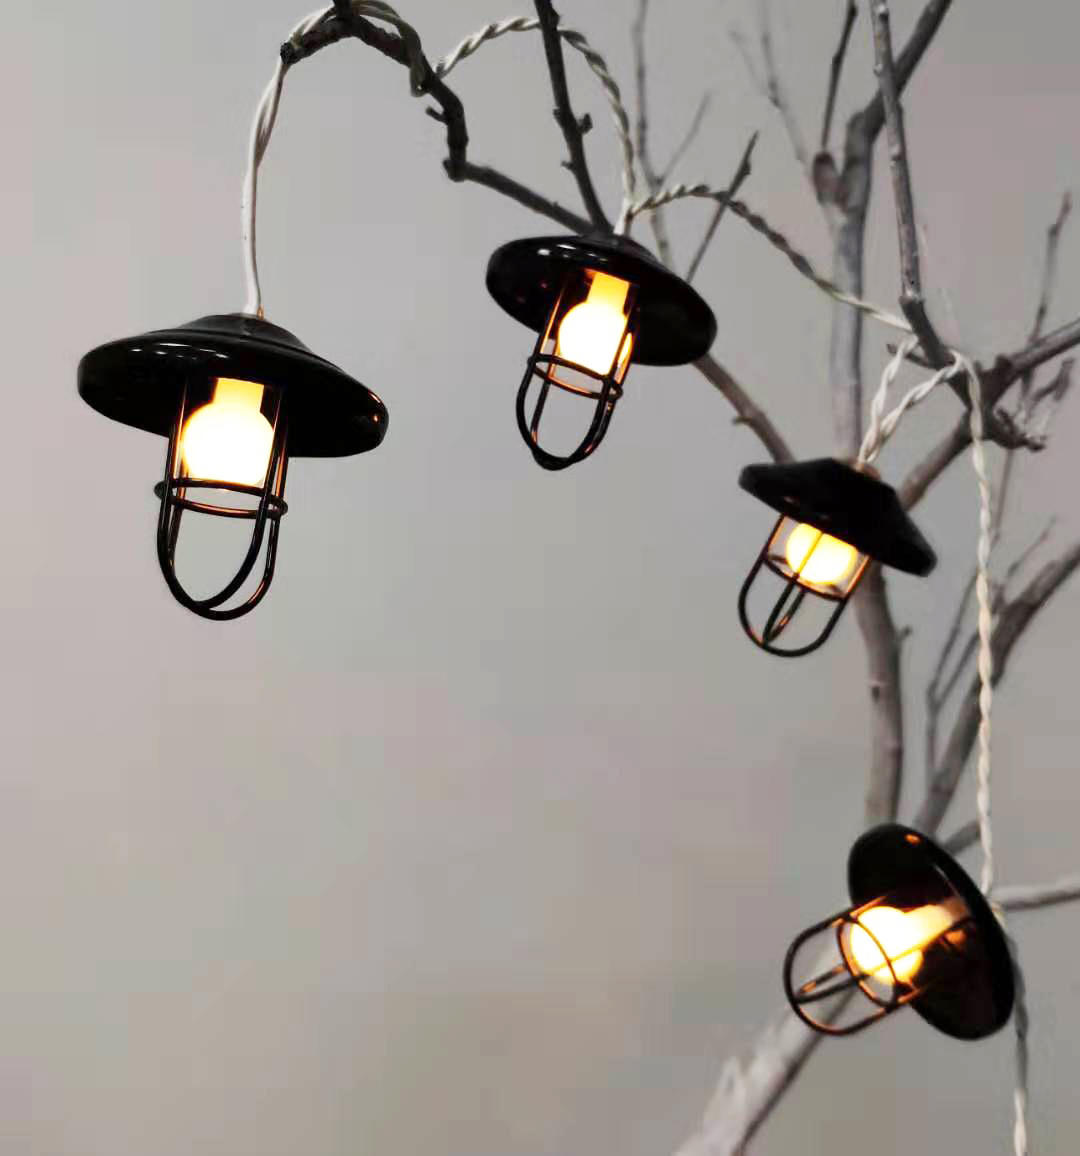 What are the tips for choosing Chinese decoration lighting?